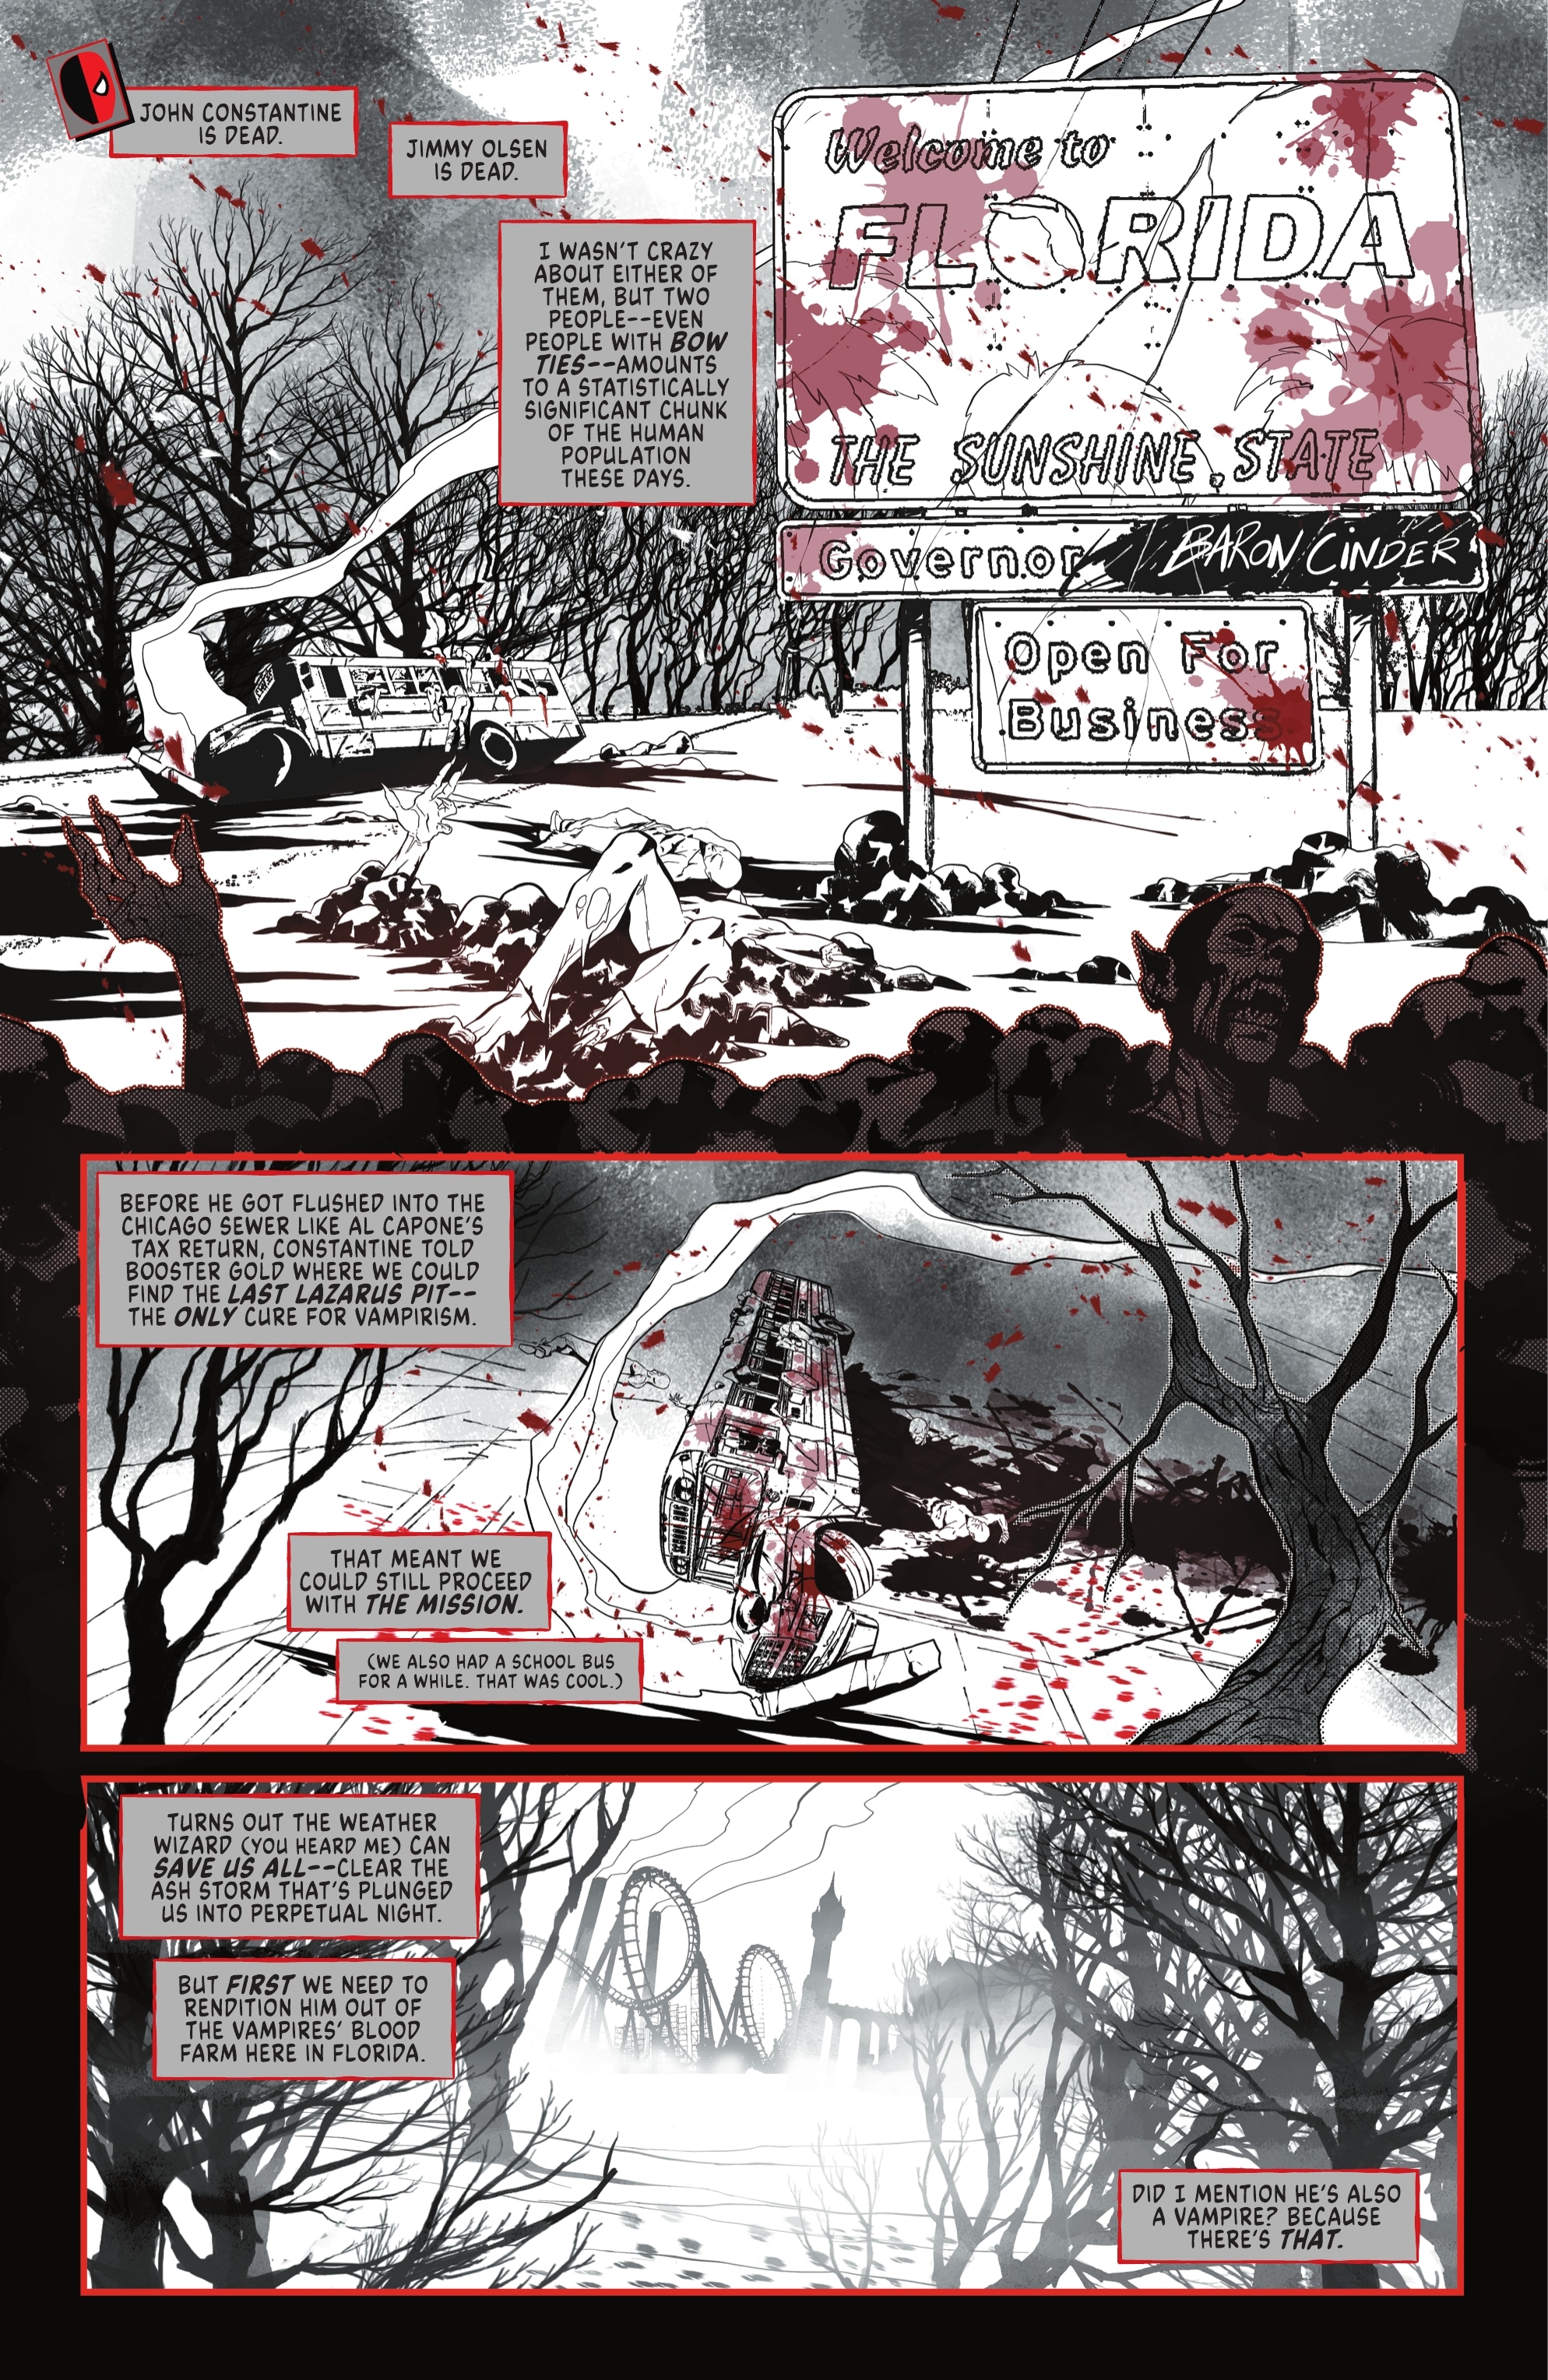 DC vs. Vampires: All-Out War (2022-): Chapter 3 - Page 3